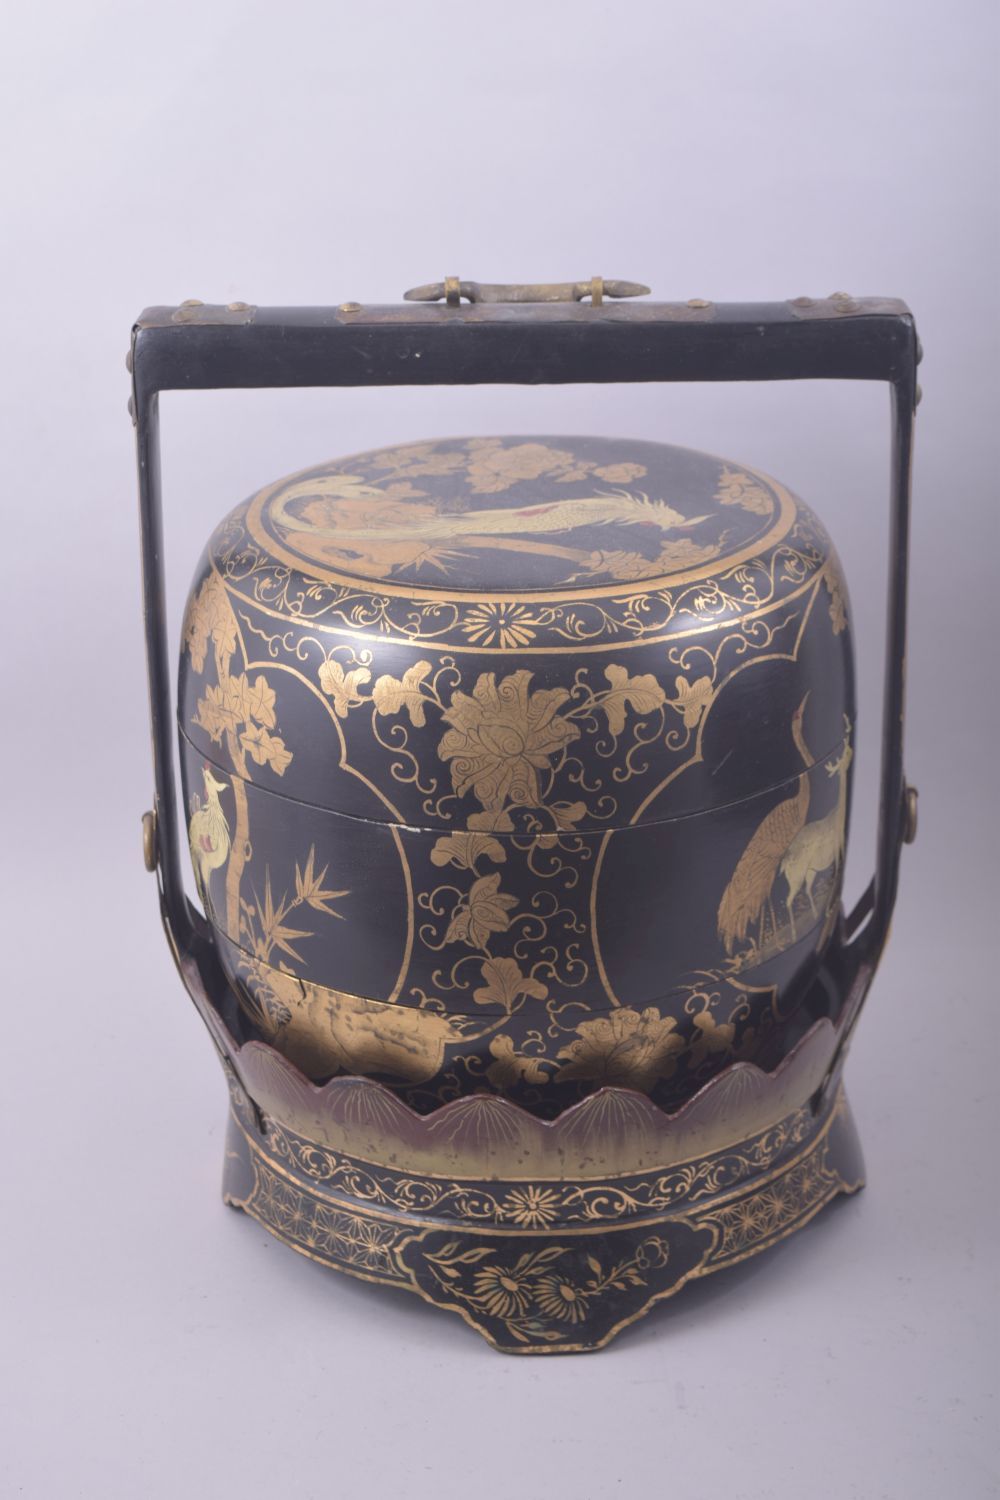 AN EARLY 20TH CENTURY LACQUERED WOOD JUBAKO / FOOD CARRIER, in black and gilt lacquer and - Image 3 of 8